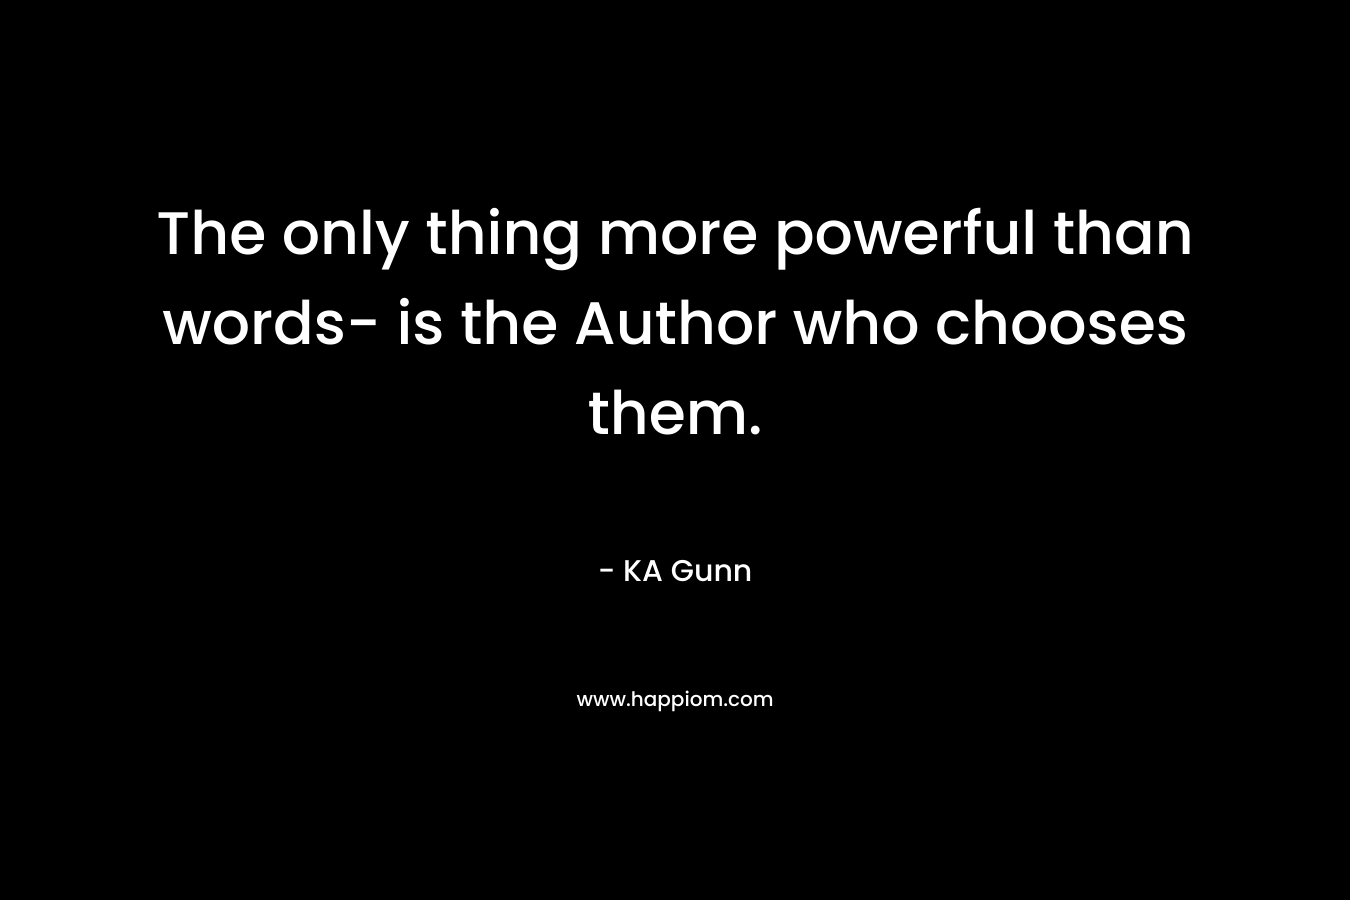 The only thing more powerful than words- is the Author who chooses them.